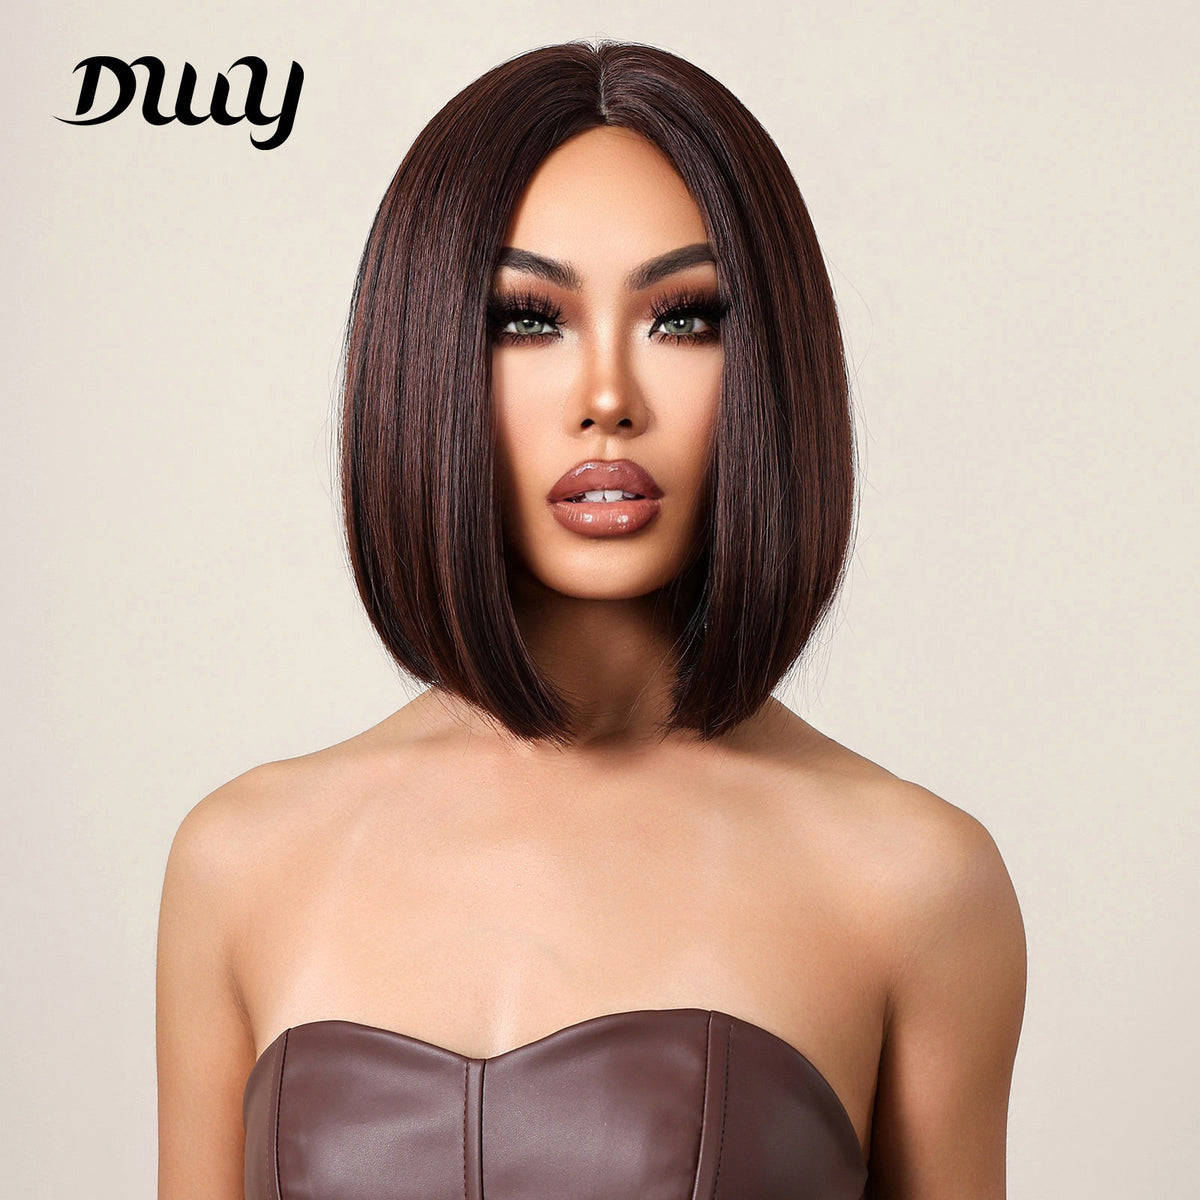 12 Inches Long Straight Brownish Black Synthetic Wigs with Reddish Brown Highlight Women's Wigs for Daily or Cosplay Use LC2009-1